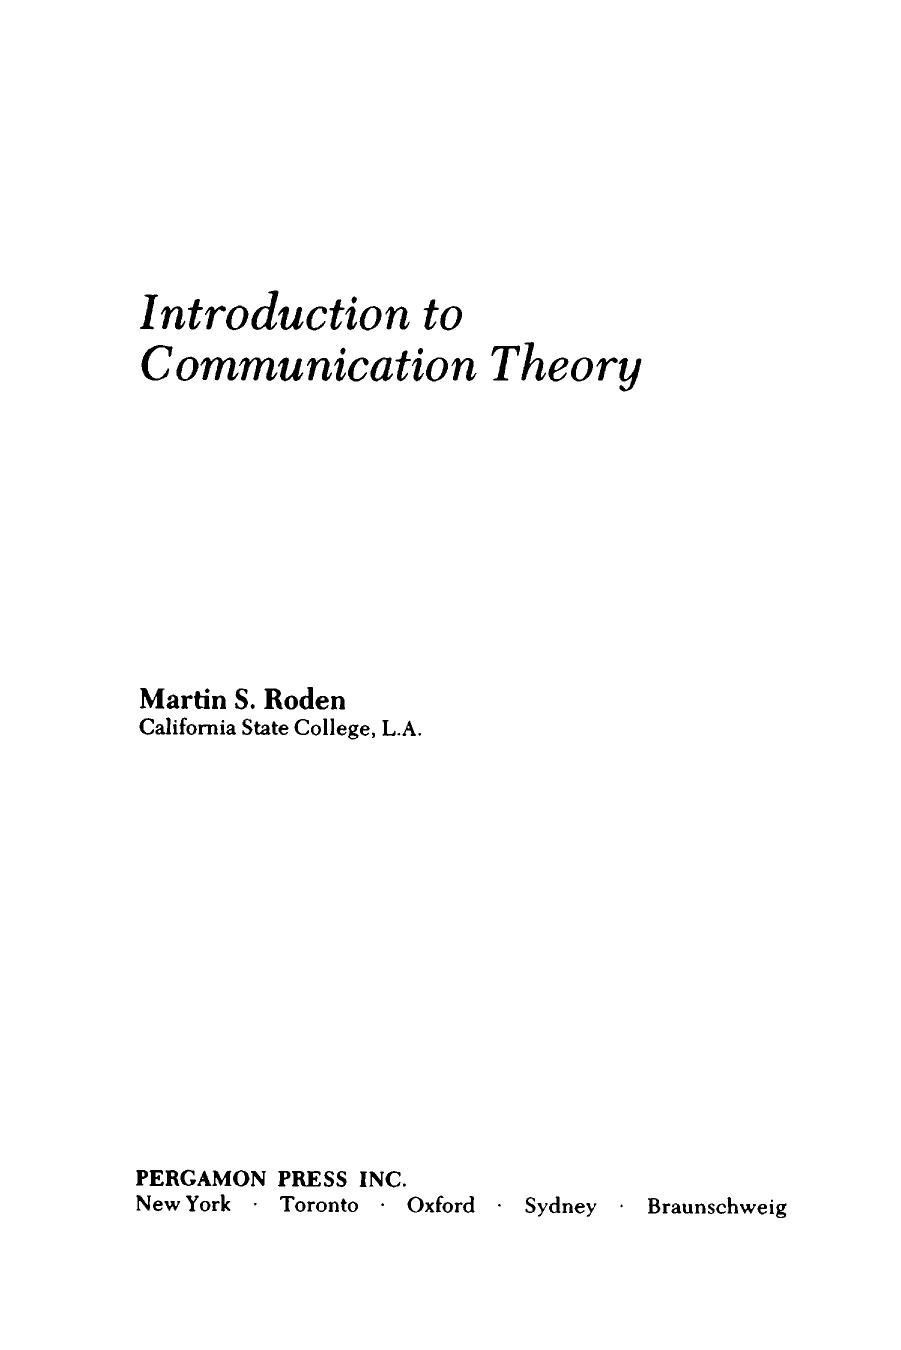 [Martin S. Roden (Auth.)] Introduction to Communic 1972